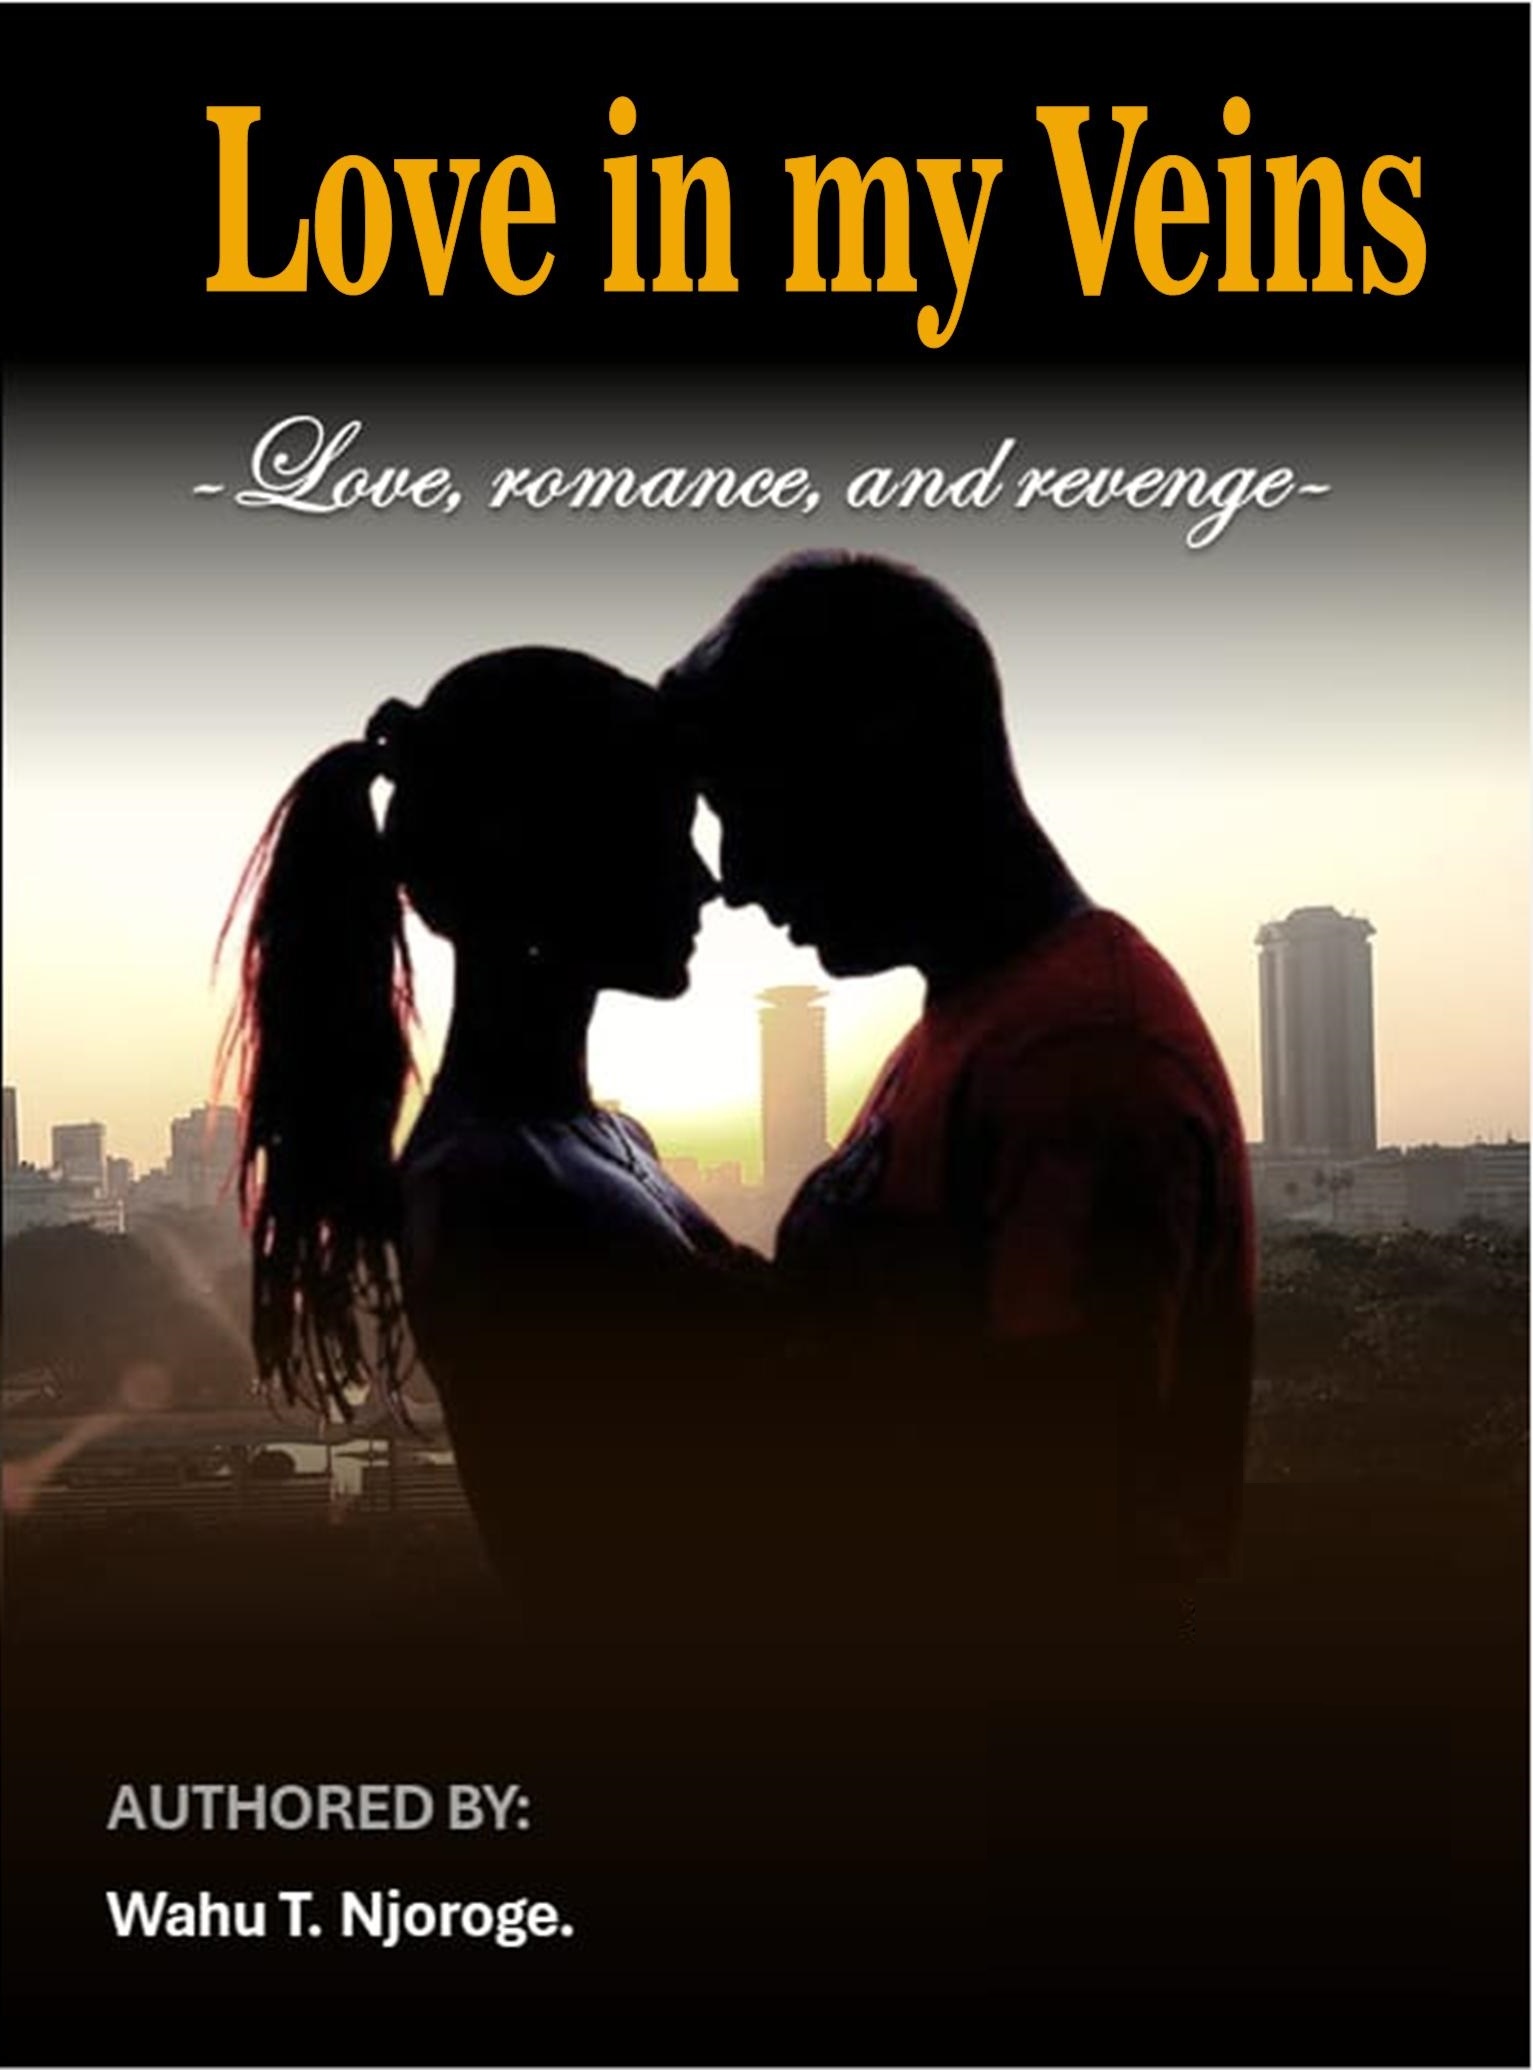 LOVE IN MY VEINS is one book by  Wahu Njoroge which explores around the aspect of love , romance, surrounding friends, betrayal  and revenge.  
The book is organized in 25 chapters  in which each chapter delves into how love forms the root of happiness, compassion and also might be the root cause of pain. 
To love well is the task in all meaningful relationships, not just romantic bonds.